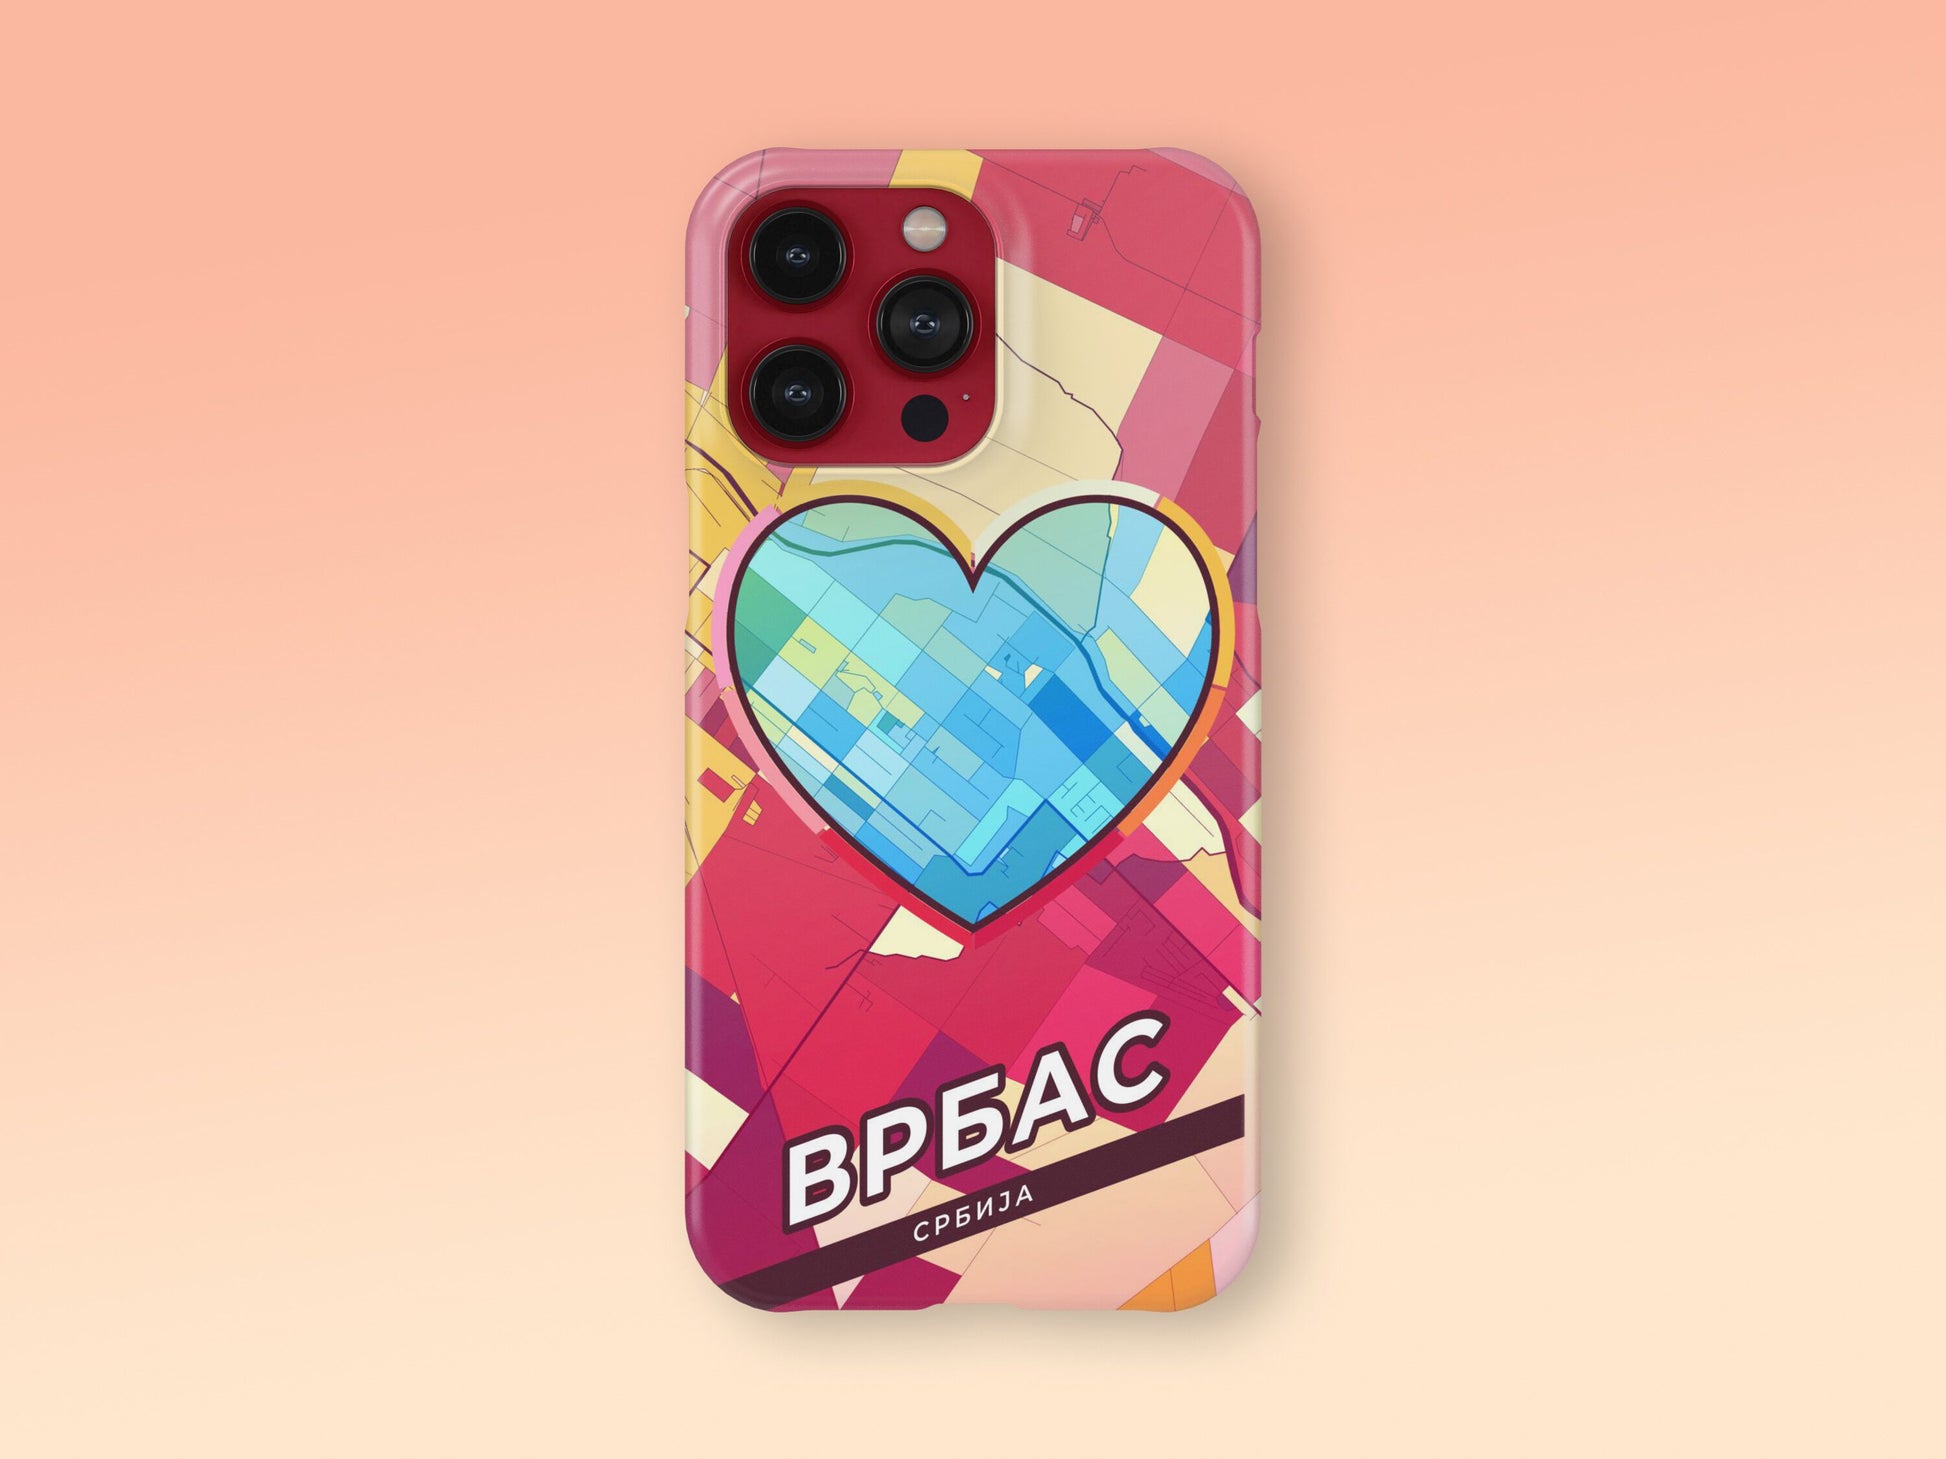 Vrbas Serbia slim phone case with colorful icon 2